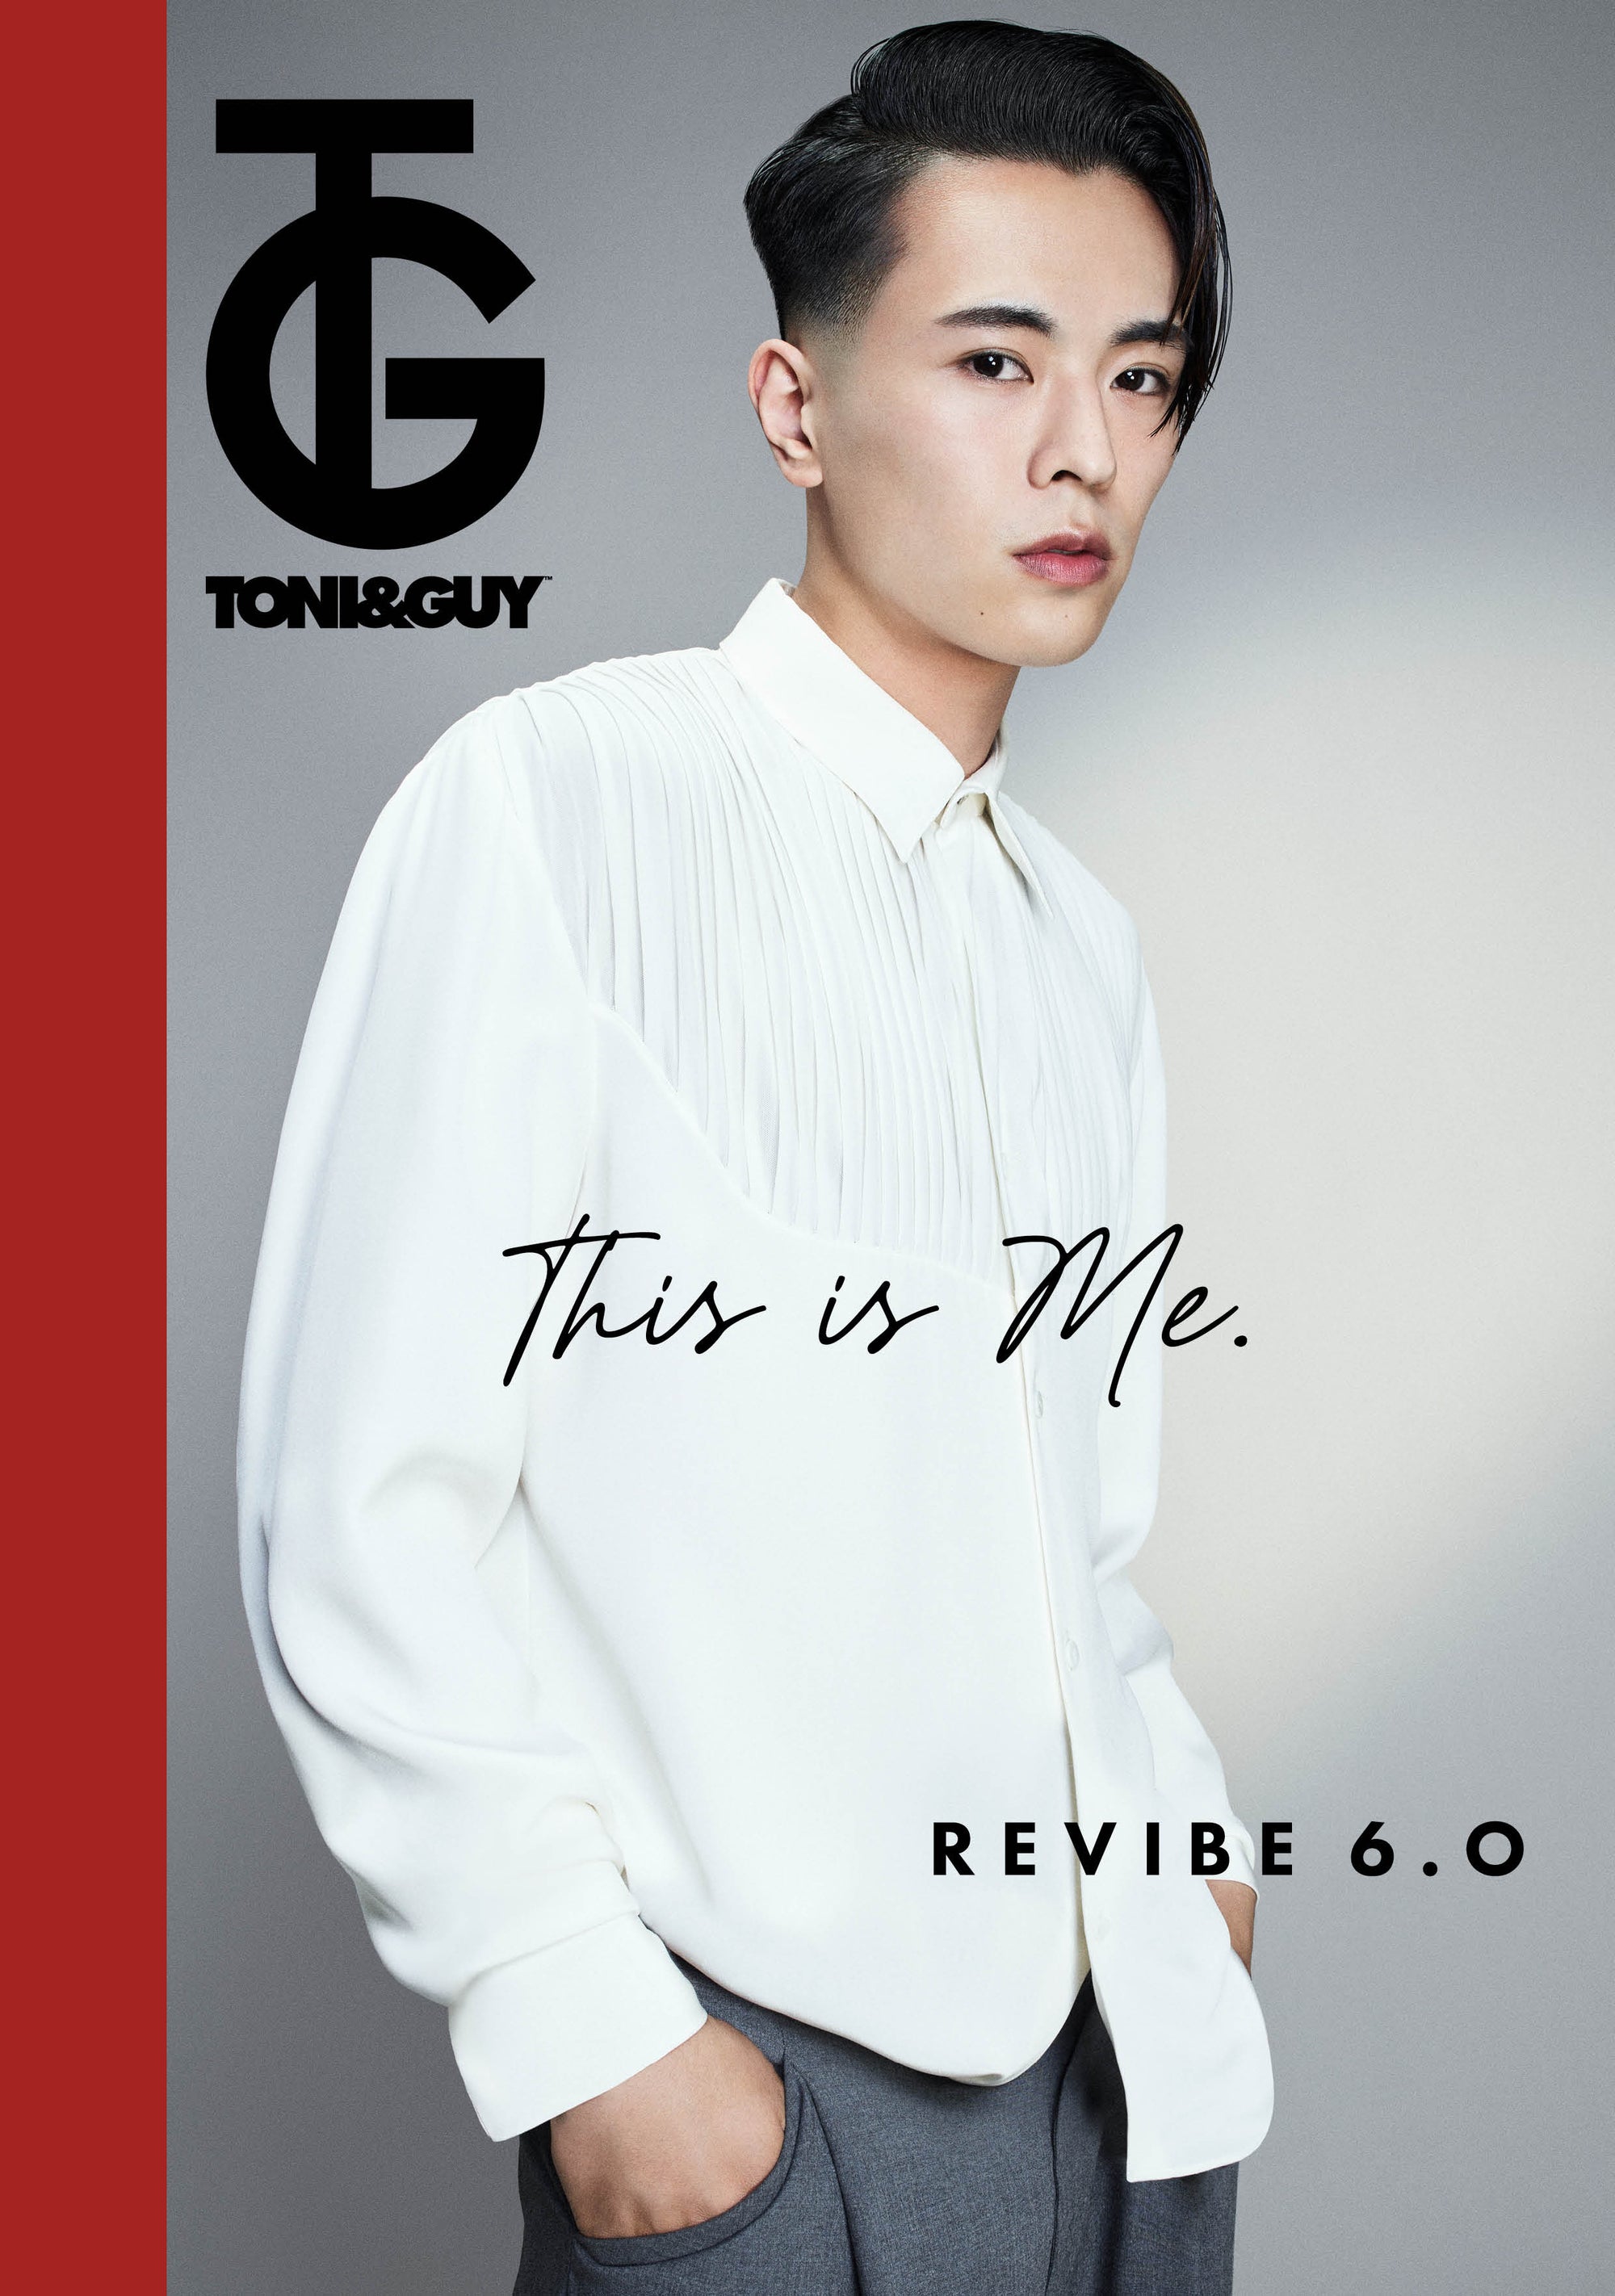 TONI&GUY REVIBE COLLECTION 2023 MENS HAIR TRENDS